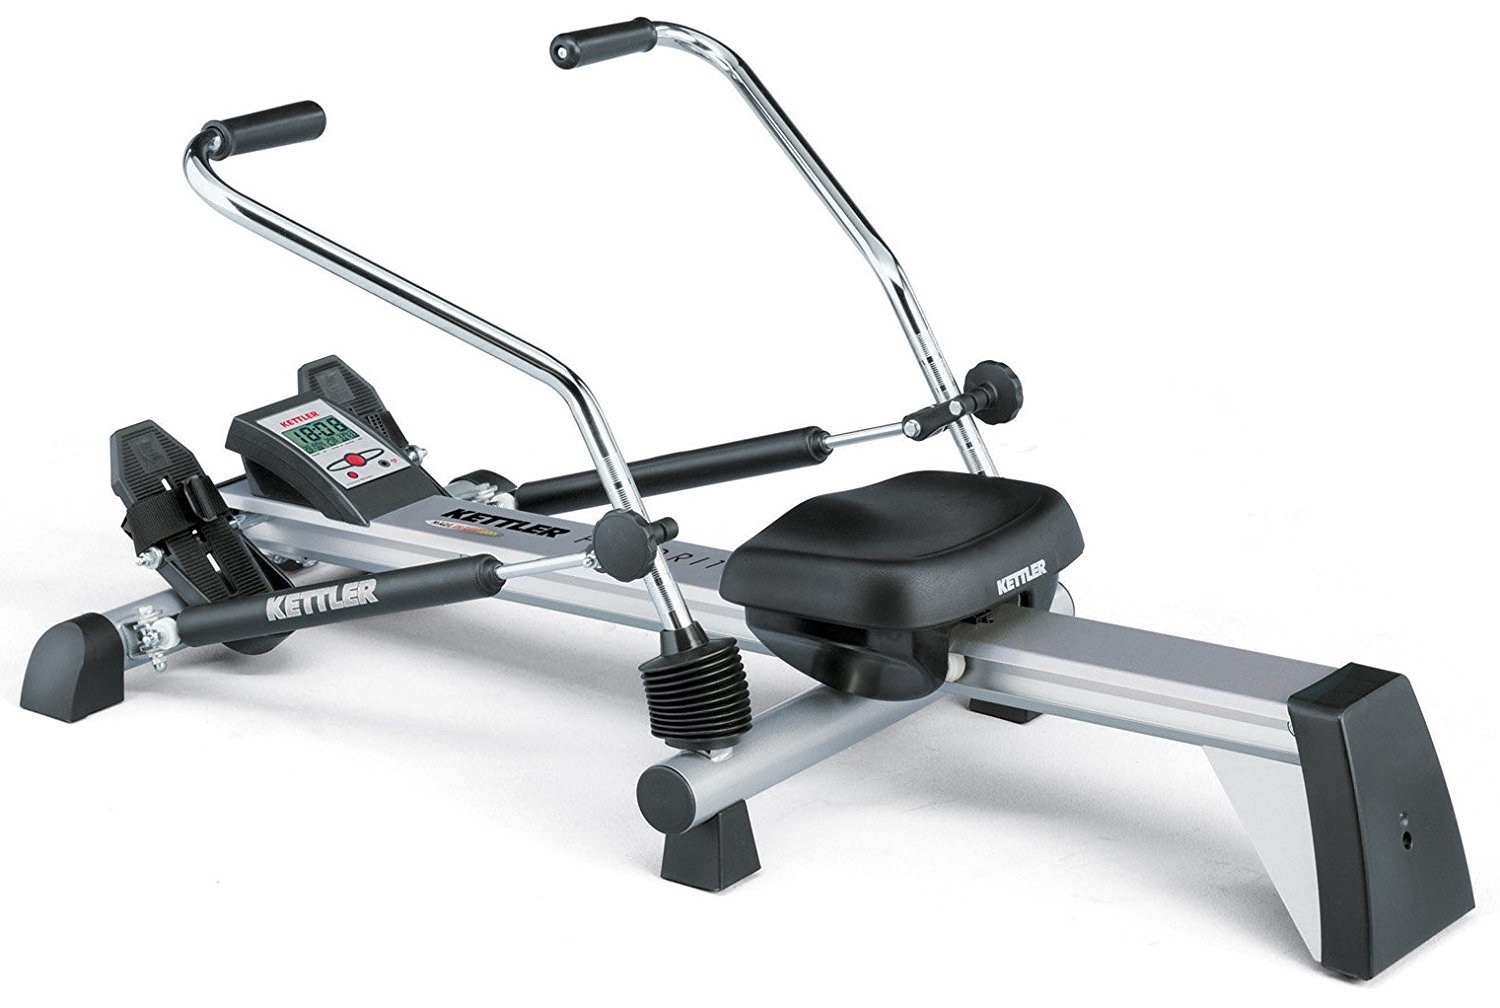 the Kettler Home Exercise-Fitness Equipment-Favorit Rowing Machine is one of the best rowing machines under $500